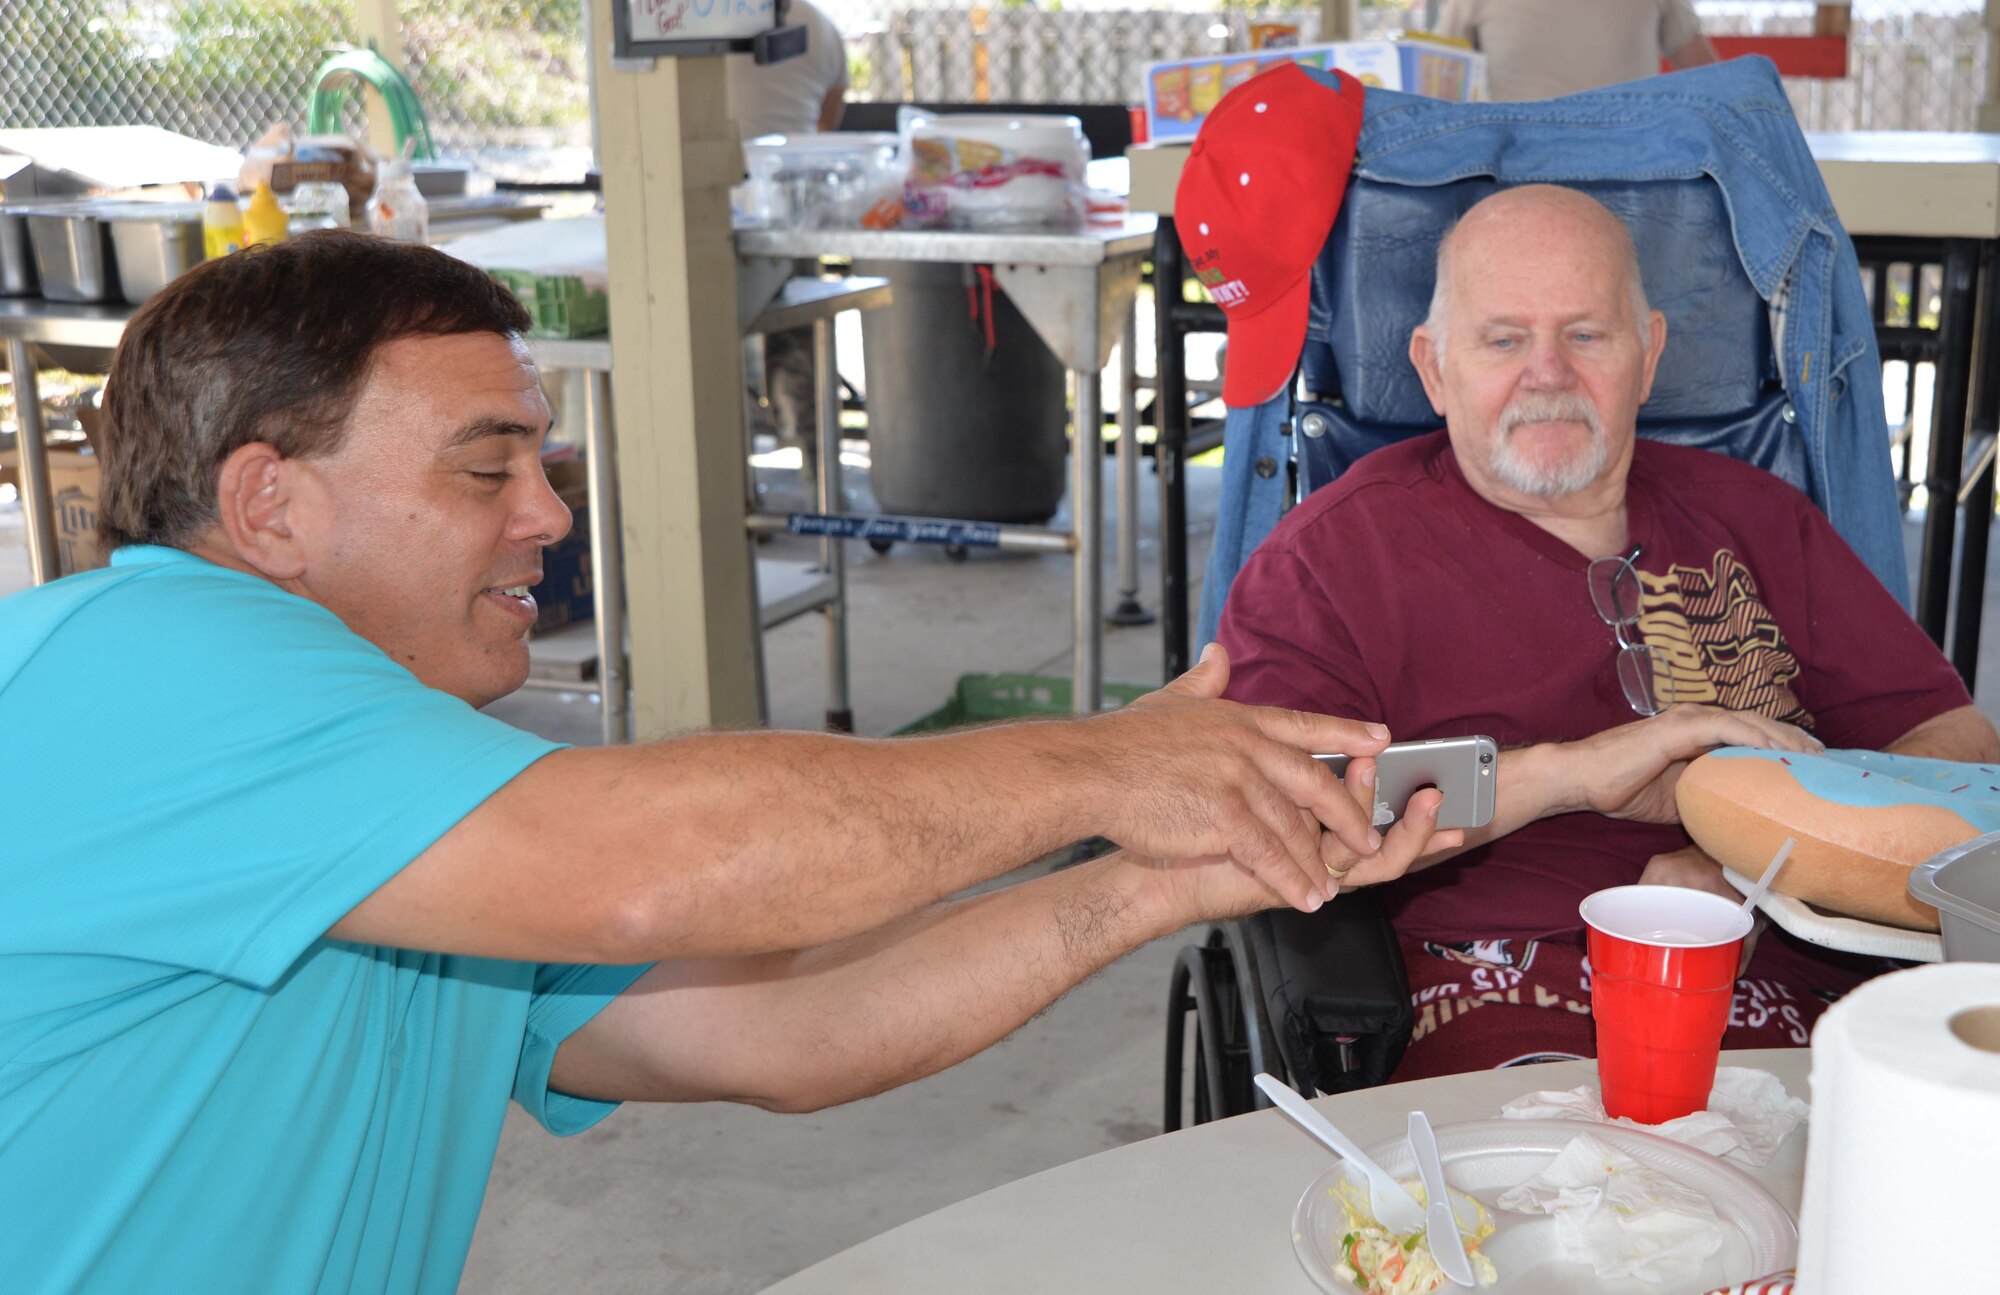 Dan Phillips, Continental U.S. NORAD Region-1st Air Force (Air Forces Northern) Communication & Information Directorate, shows a photo from his phone to Johnny Mack Jones, a resident of the Clifford Chester Sims State Veterans Nursing Home, during a luncheon at American Legion Post 392 in Panama City. Event organizer David Shaw, a Legion member from CONR-1st AF (AFNORTH), said the luncheon was an opportunity to spend time with the veterans and recognize them for their selfless service and sacrifice. (Photo by Mary McHale)